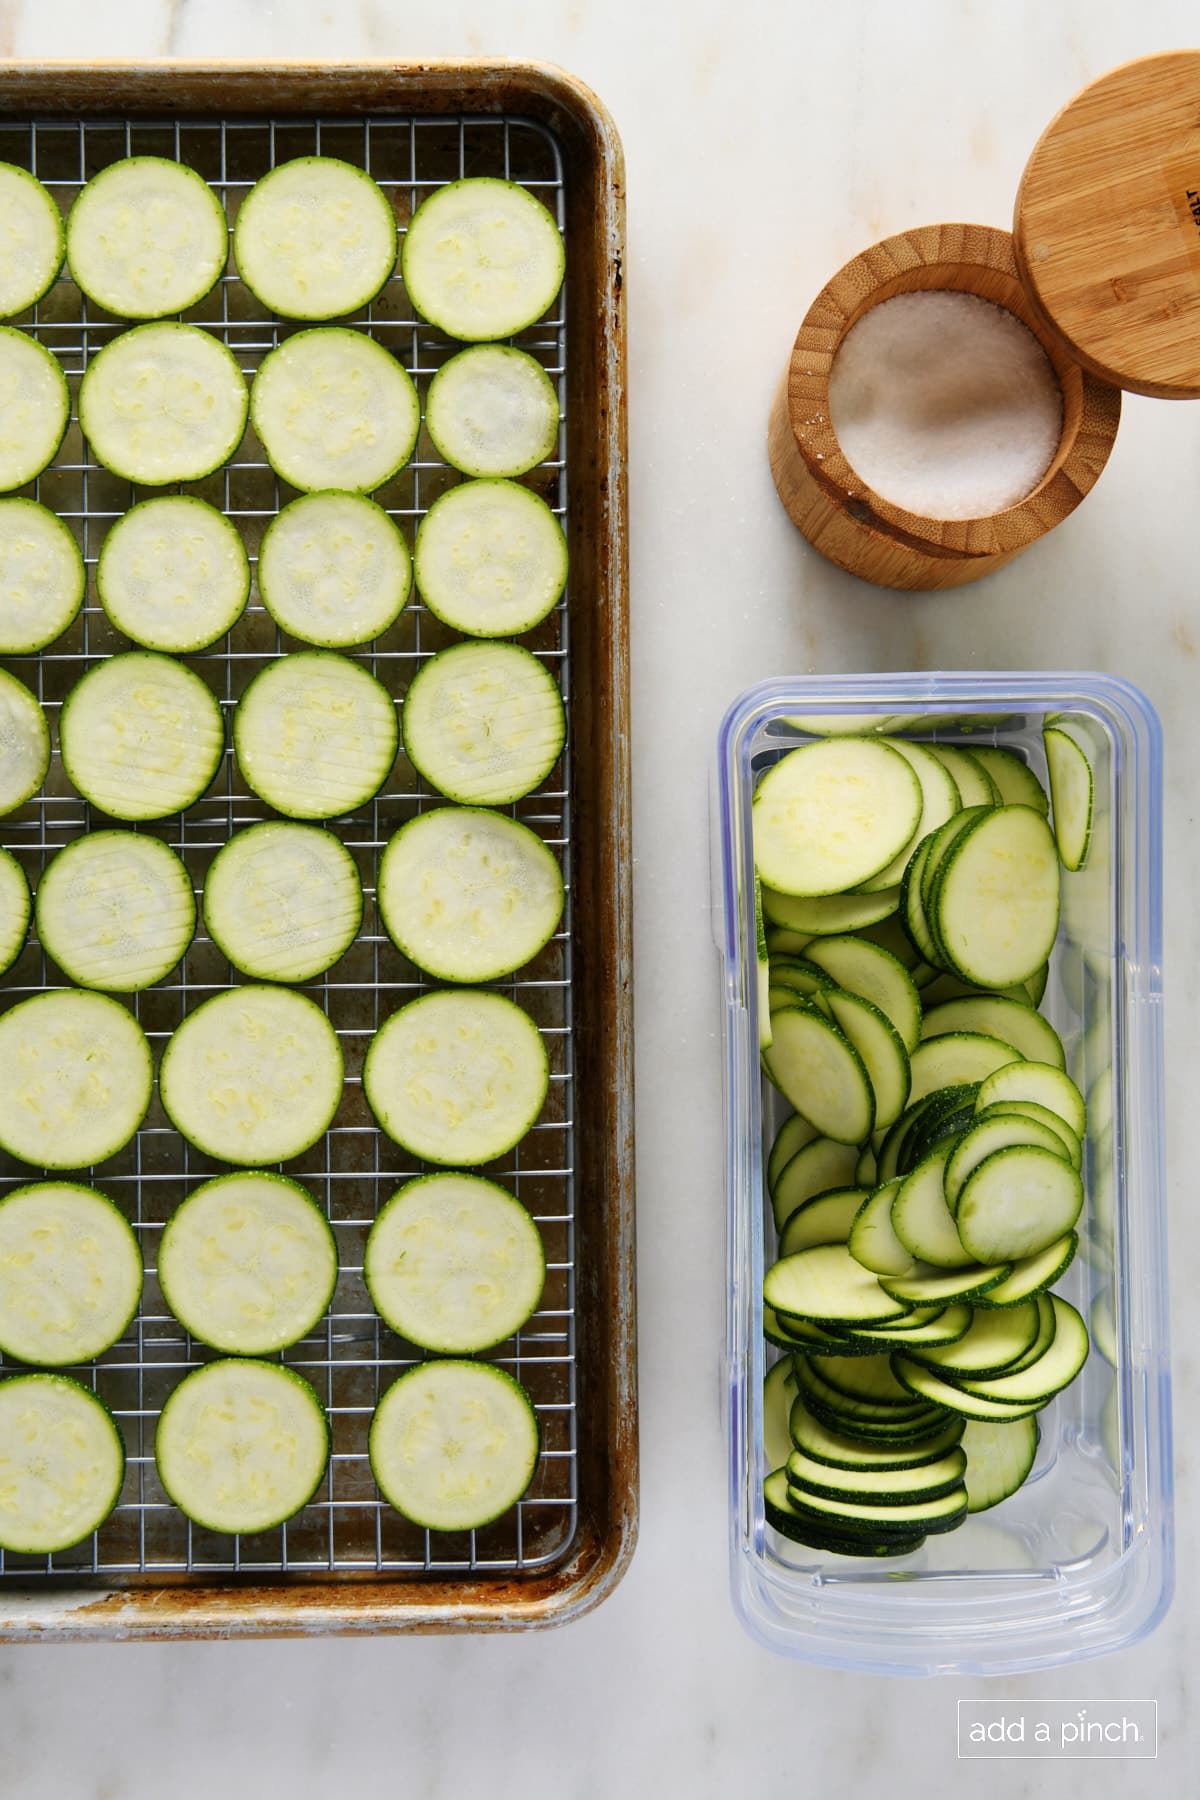 Wired rack in a rimmed baking sheet holds rows of zucchini crisps beside a wooden salt container and container of zucchini slices //addapinch.com